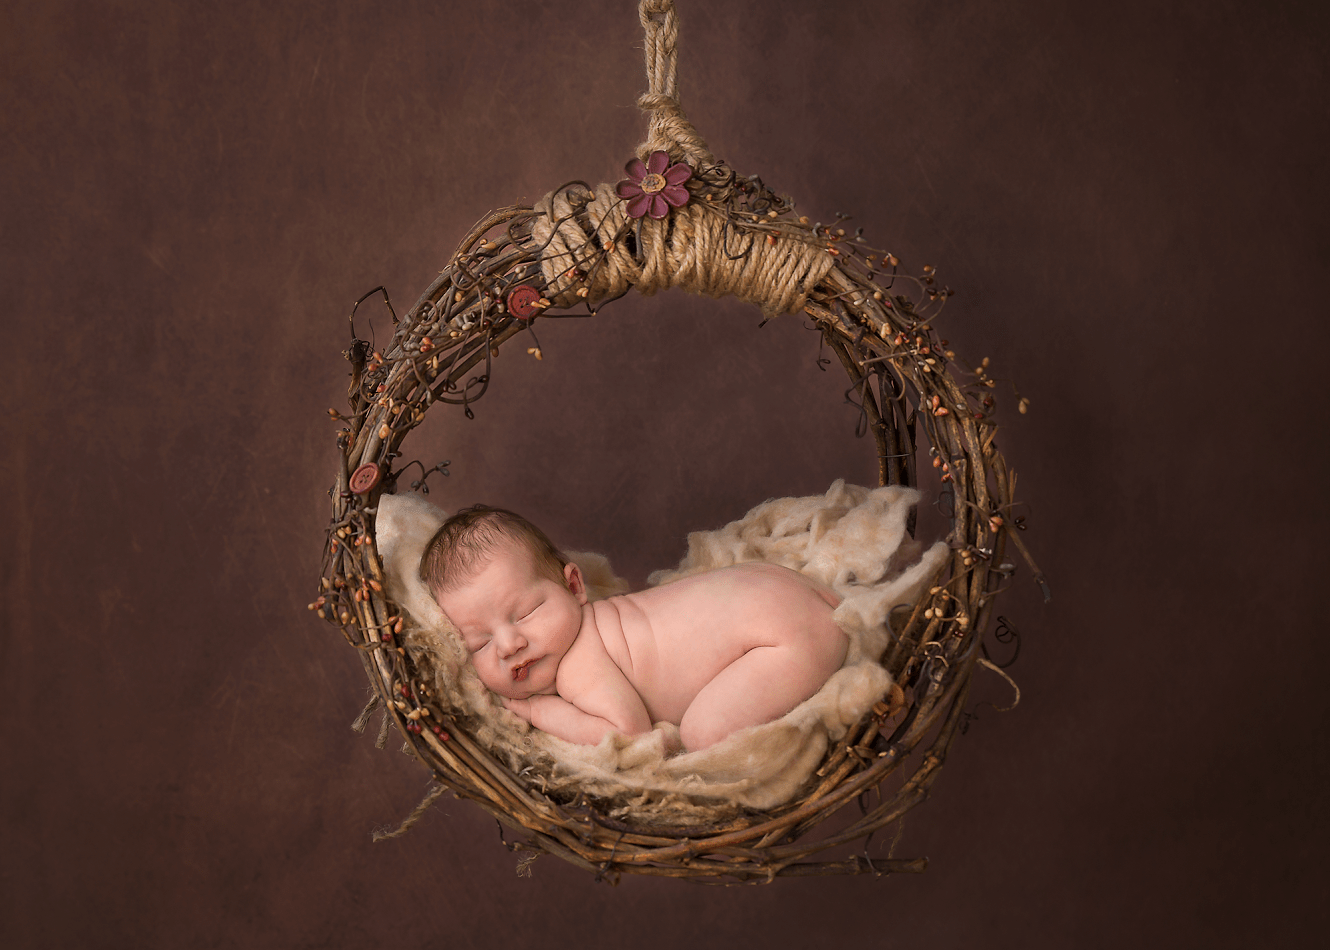 This image is of gorgeous baby Luna Gem, and it was taken when she was just 8 days new! This is such an amazing time to capture newborns.The image was taken using natural light in my home-based studio. I chose earthy toned props for a timeless look. Luna Gem was such a gorgeous baby to photograph - so tiny, cute and squishy!